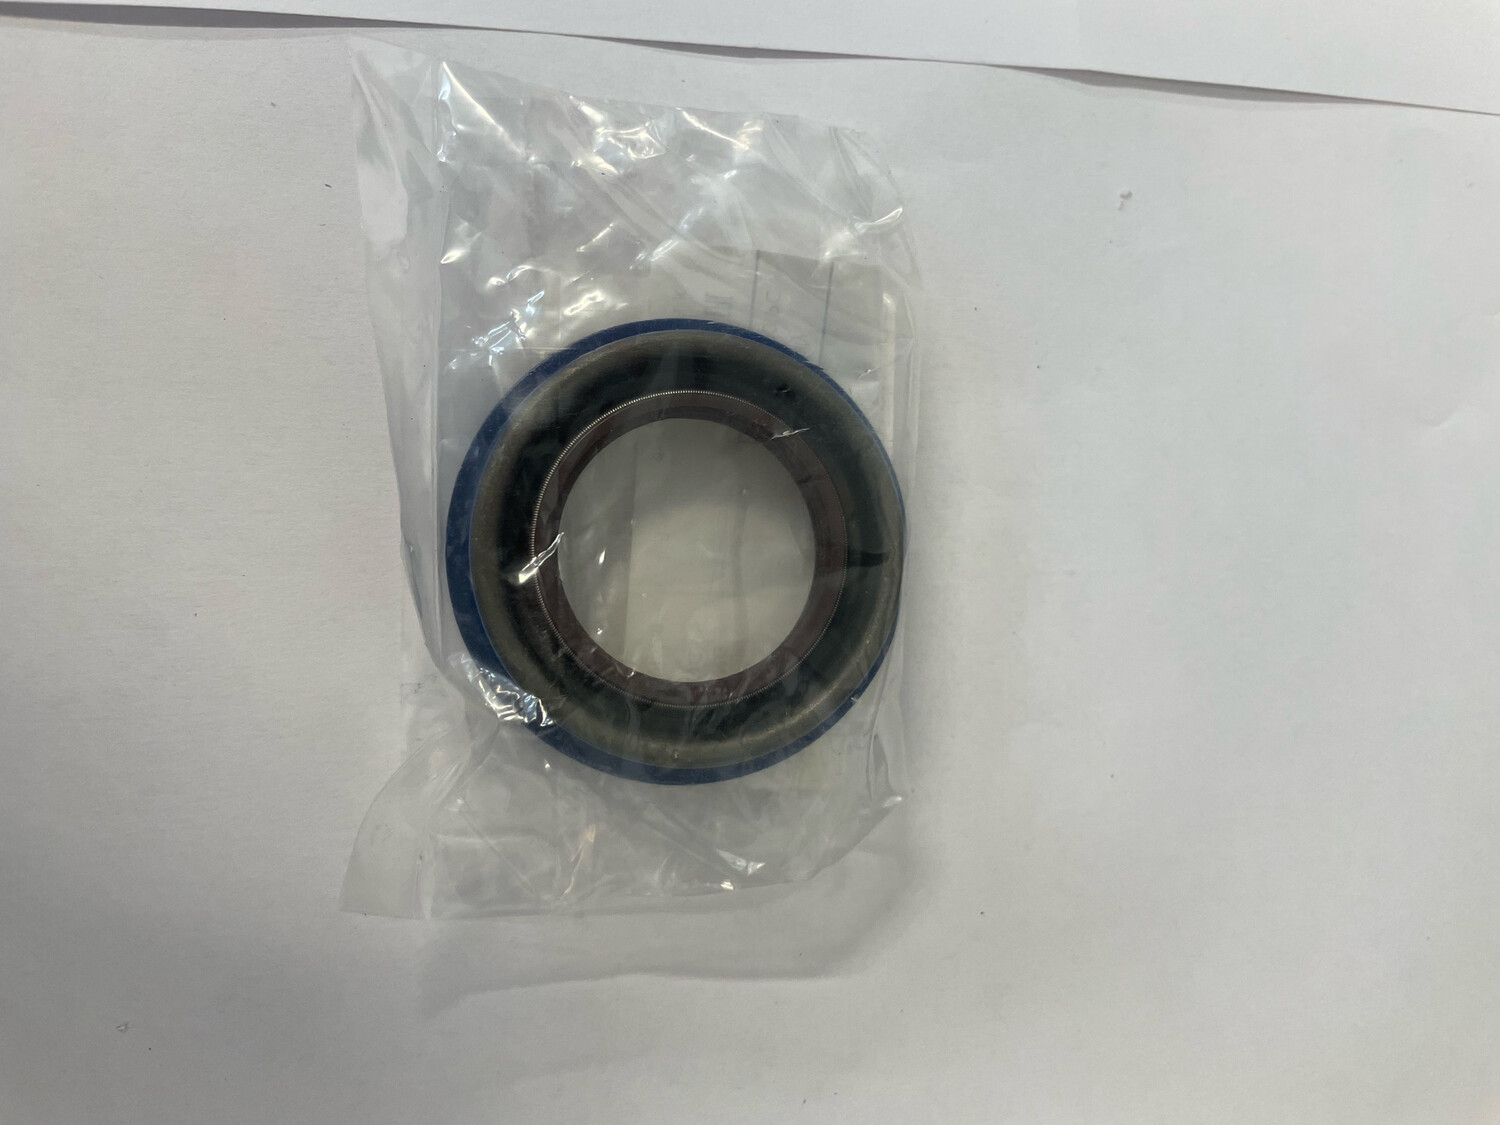 Replacement F23 Driveshaft Seals